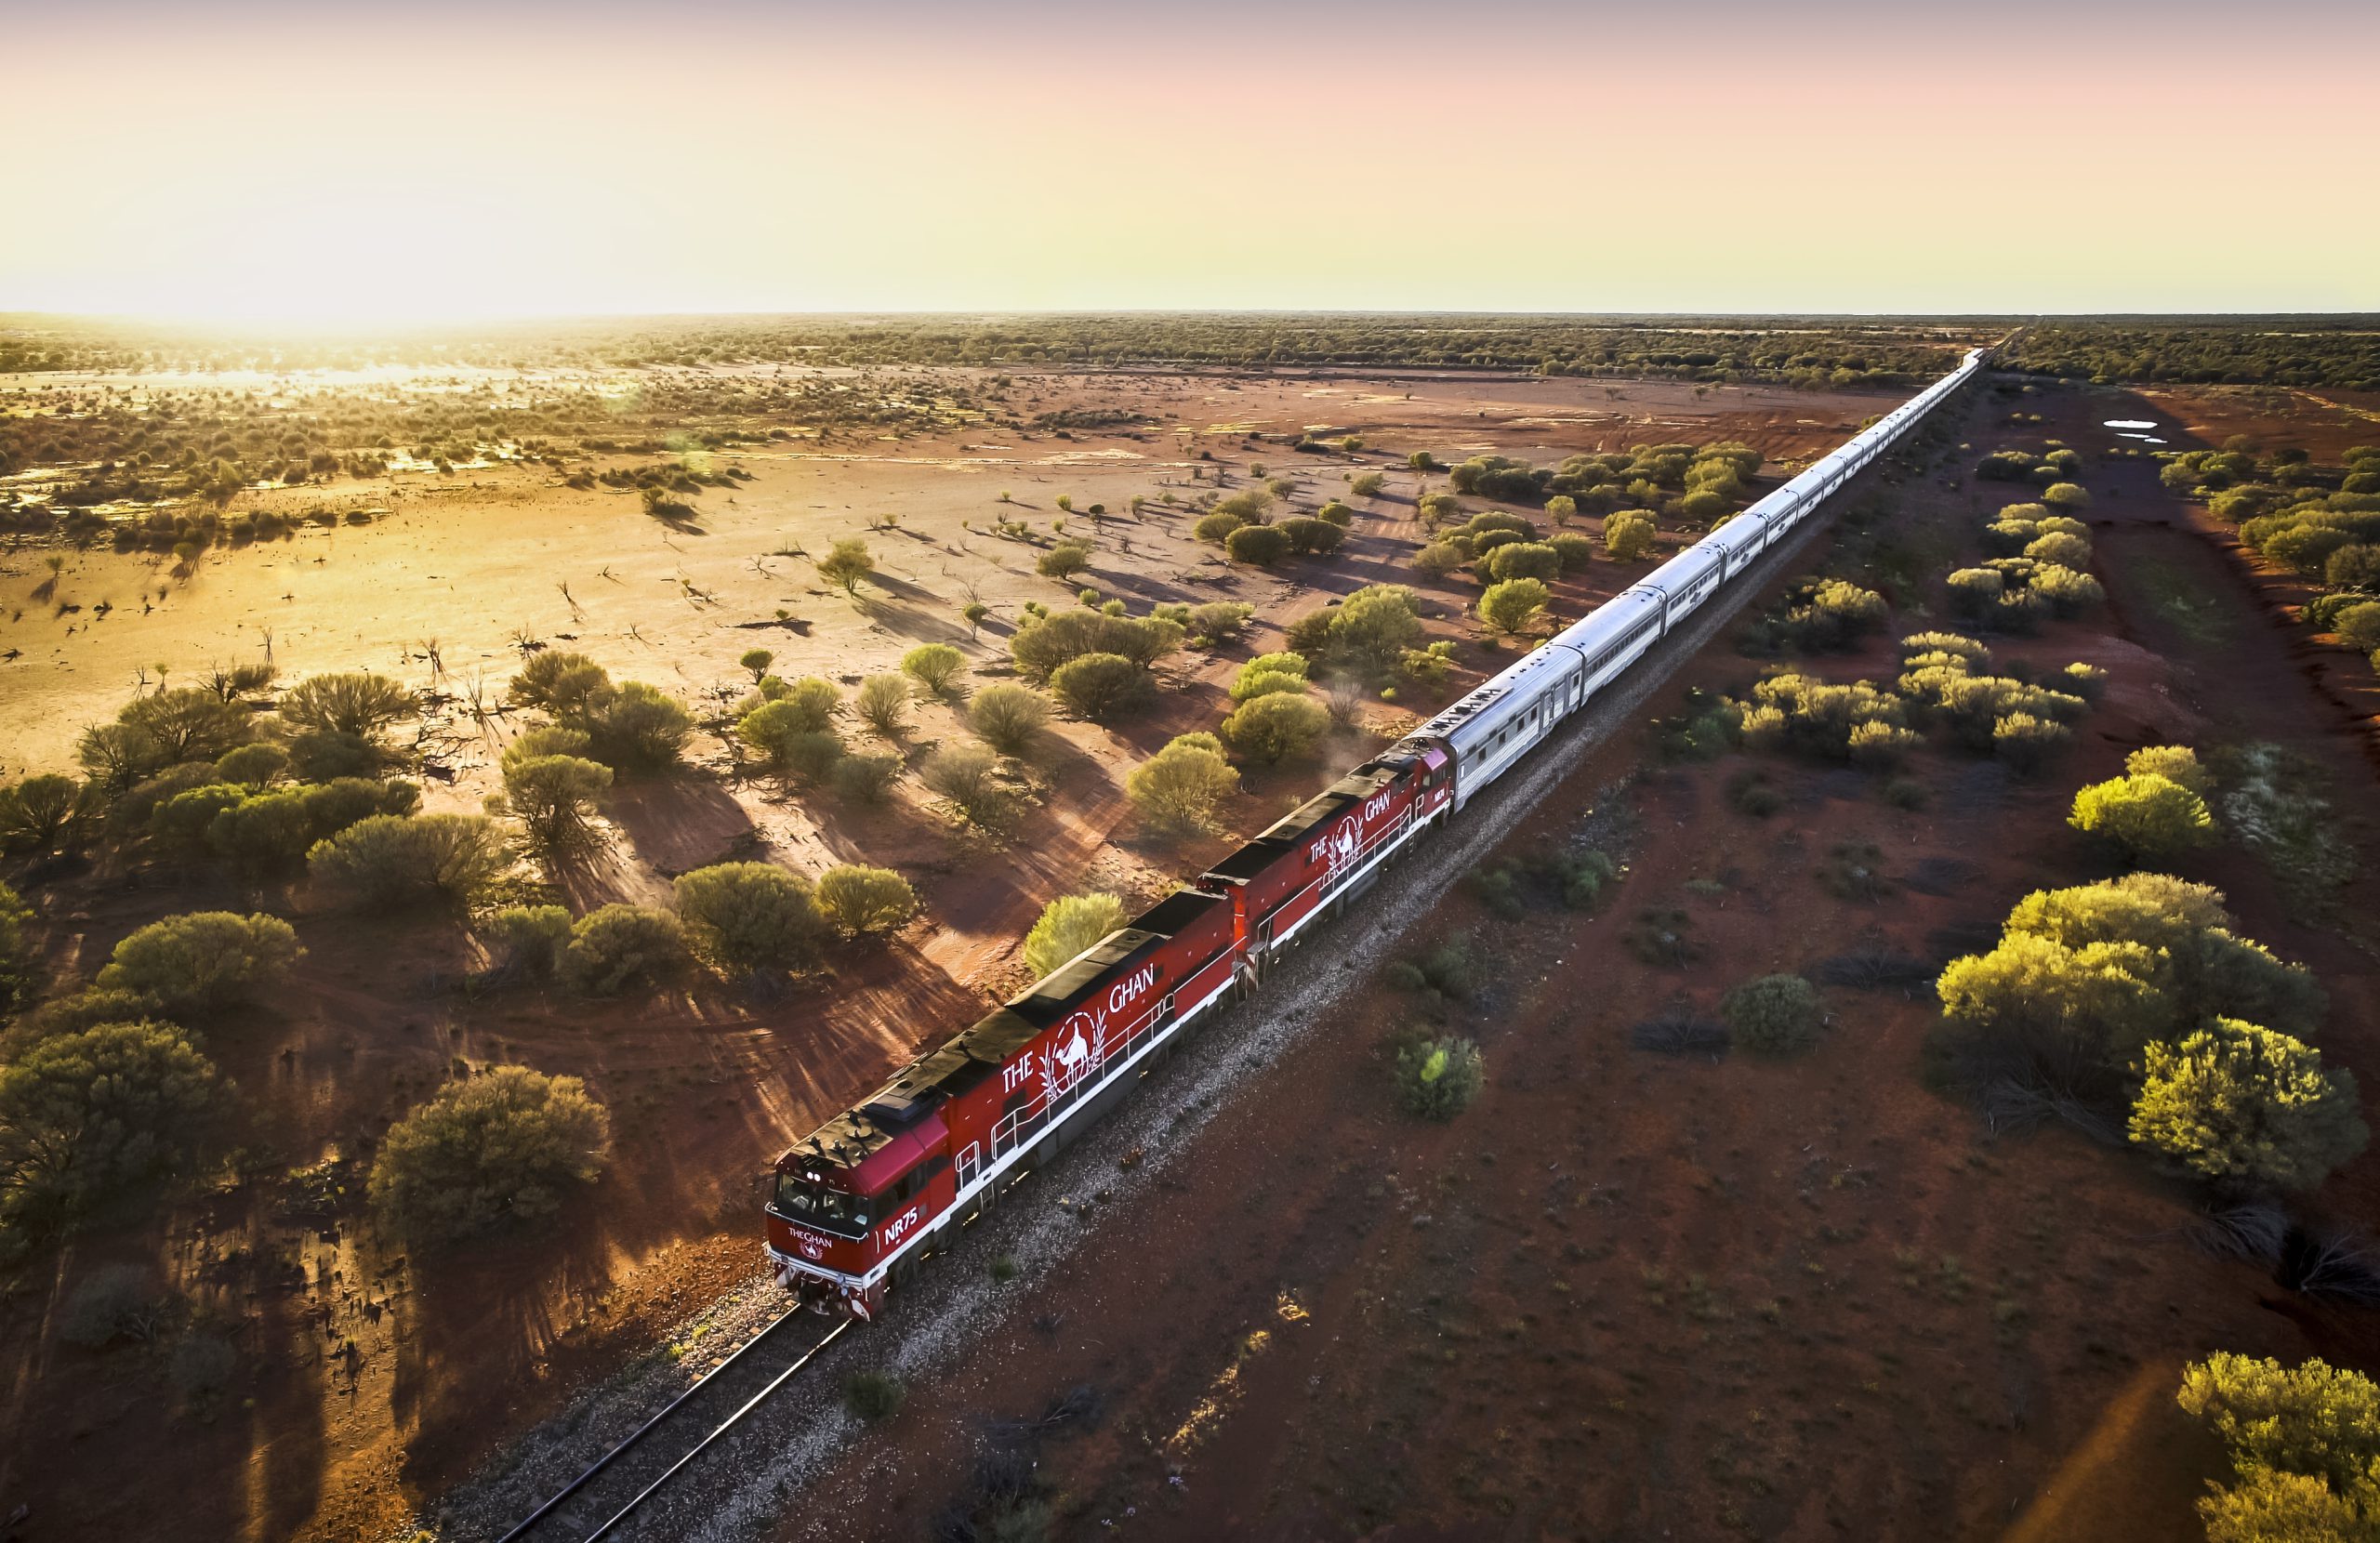 Take a journey on the mighty Ghan to Darwin and explore the wonders of the great Australian outback